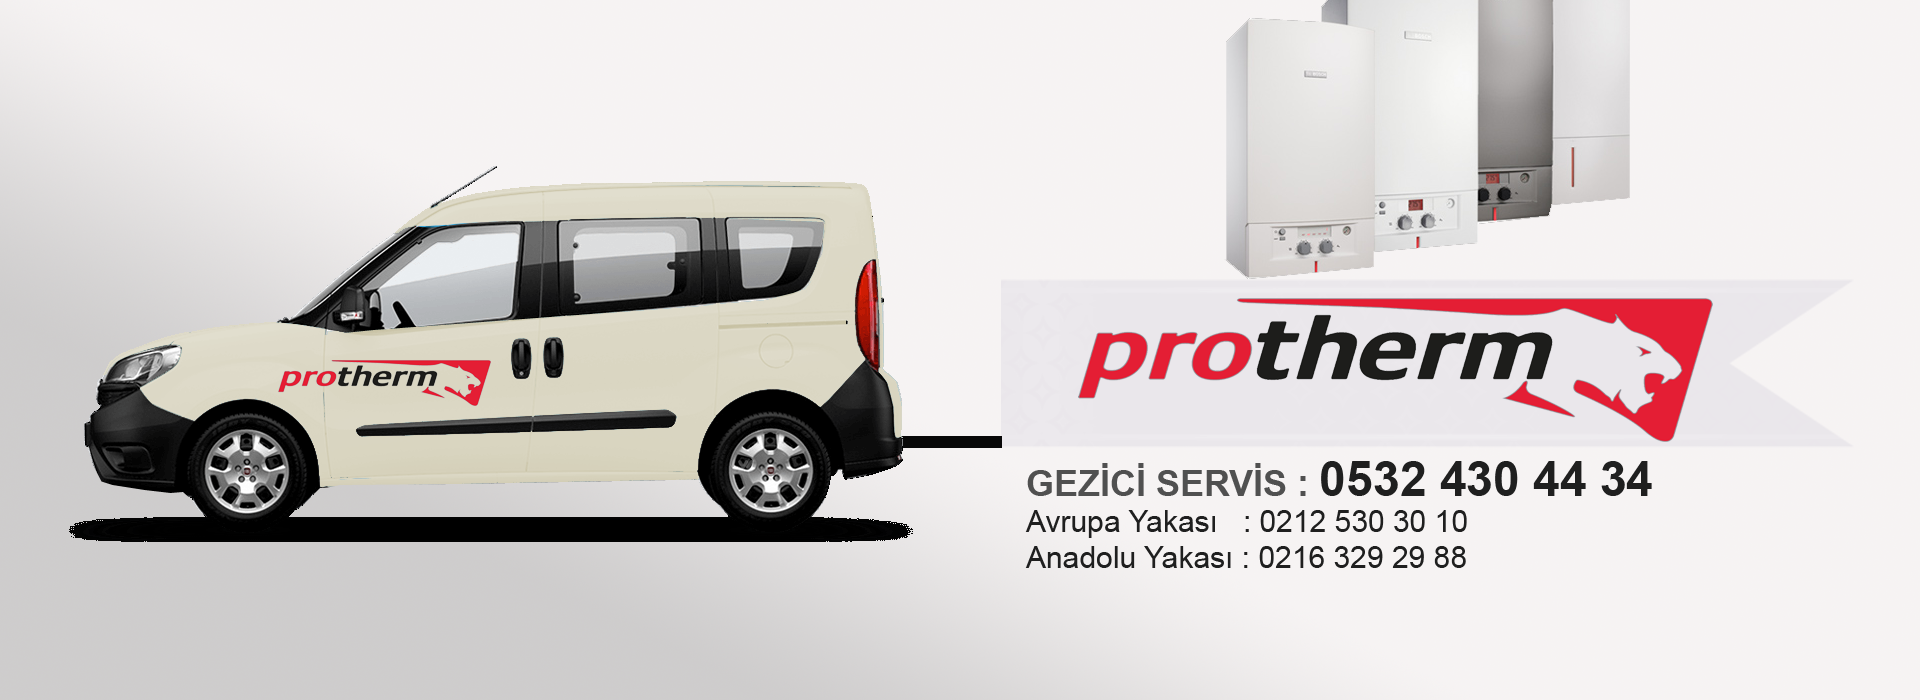 Protherm servisi